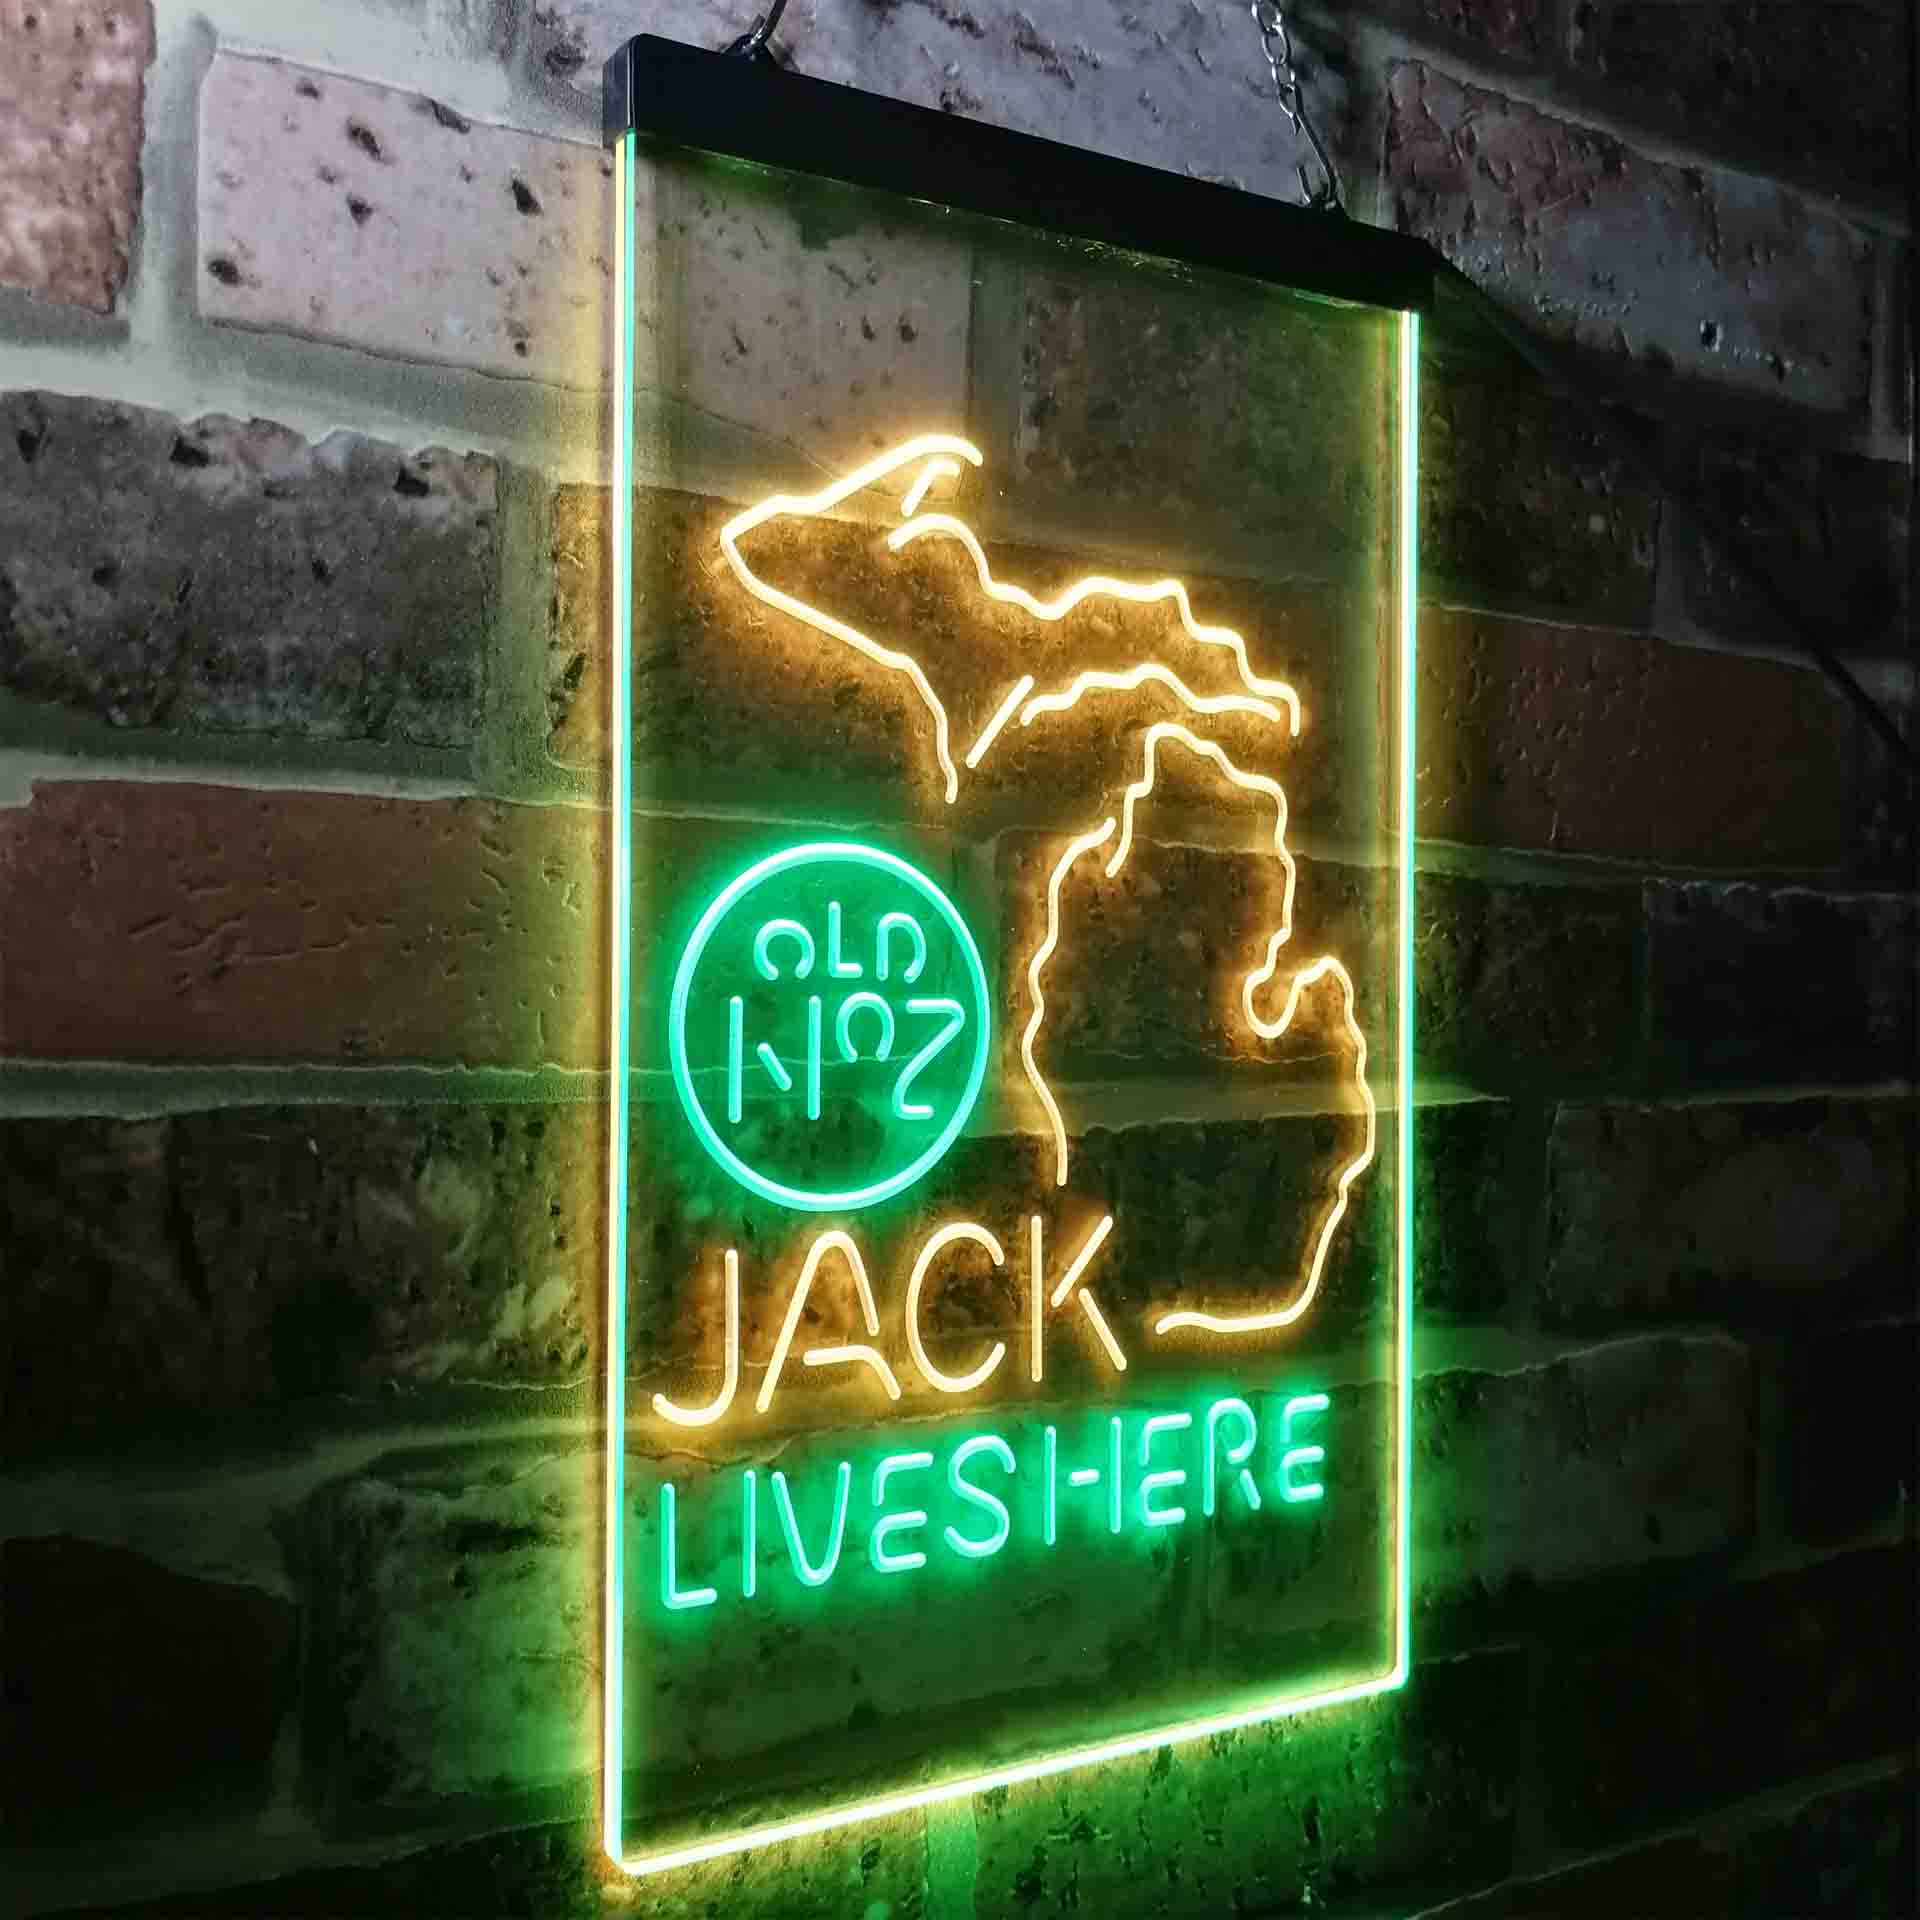 Michigan Jack Lives Here Neon LED Sign